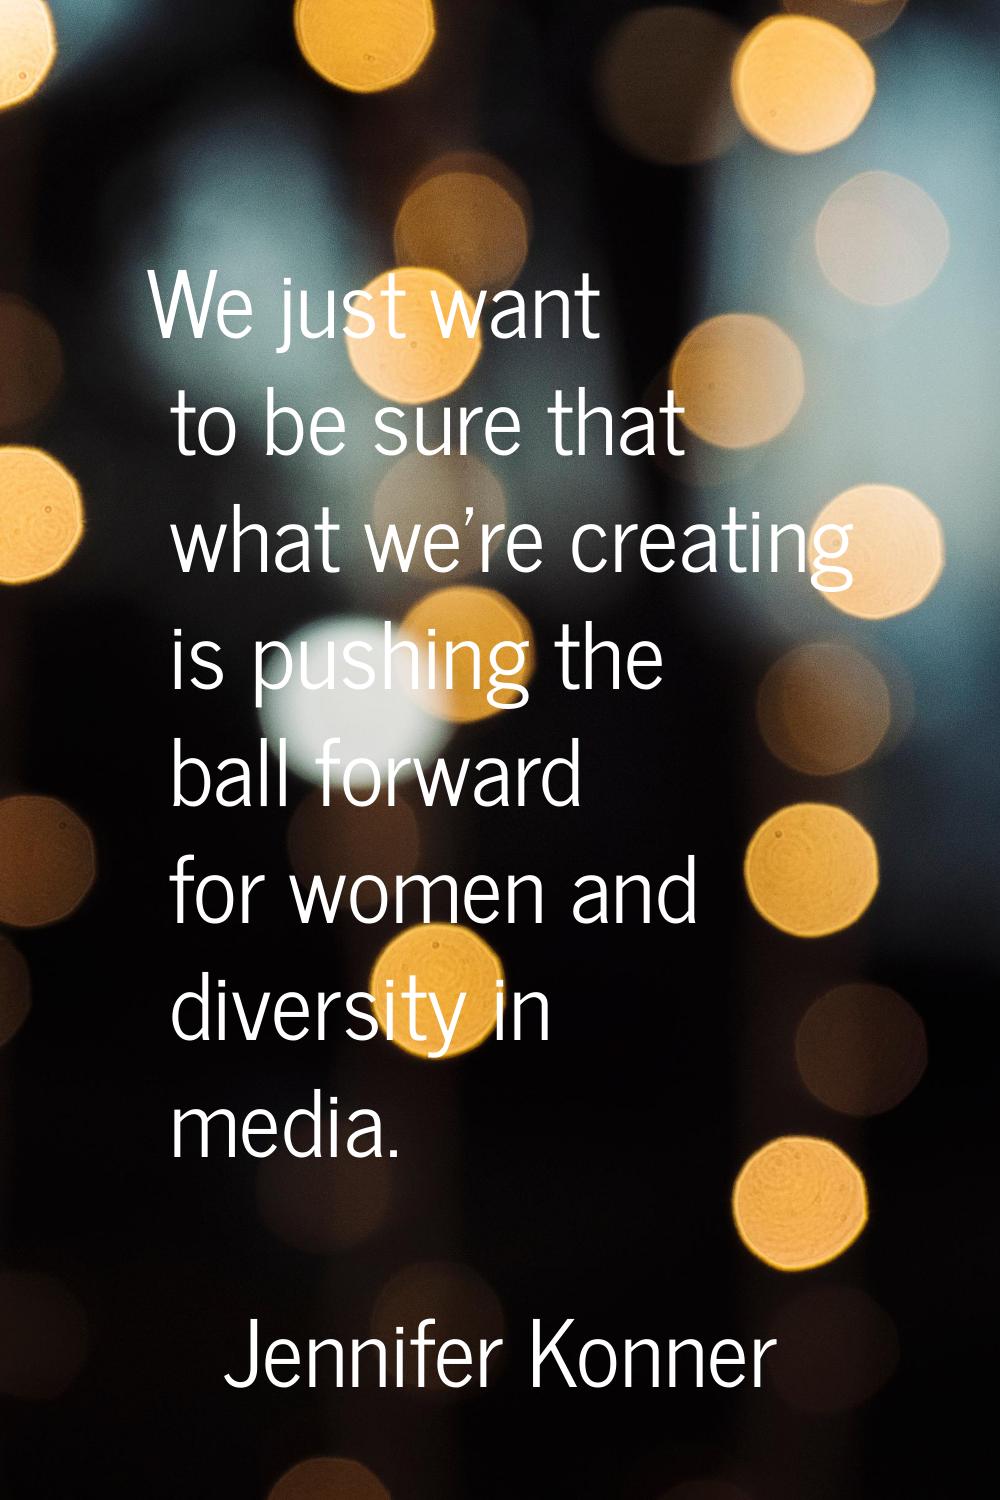 We just want to be sure that what we're creating is pushing the ball forward for women and diversit